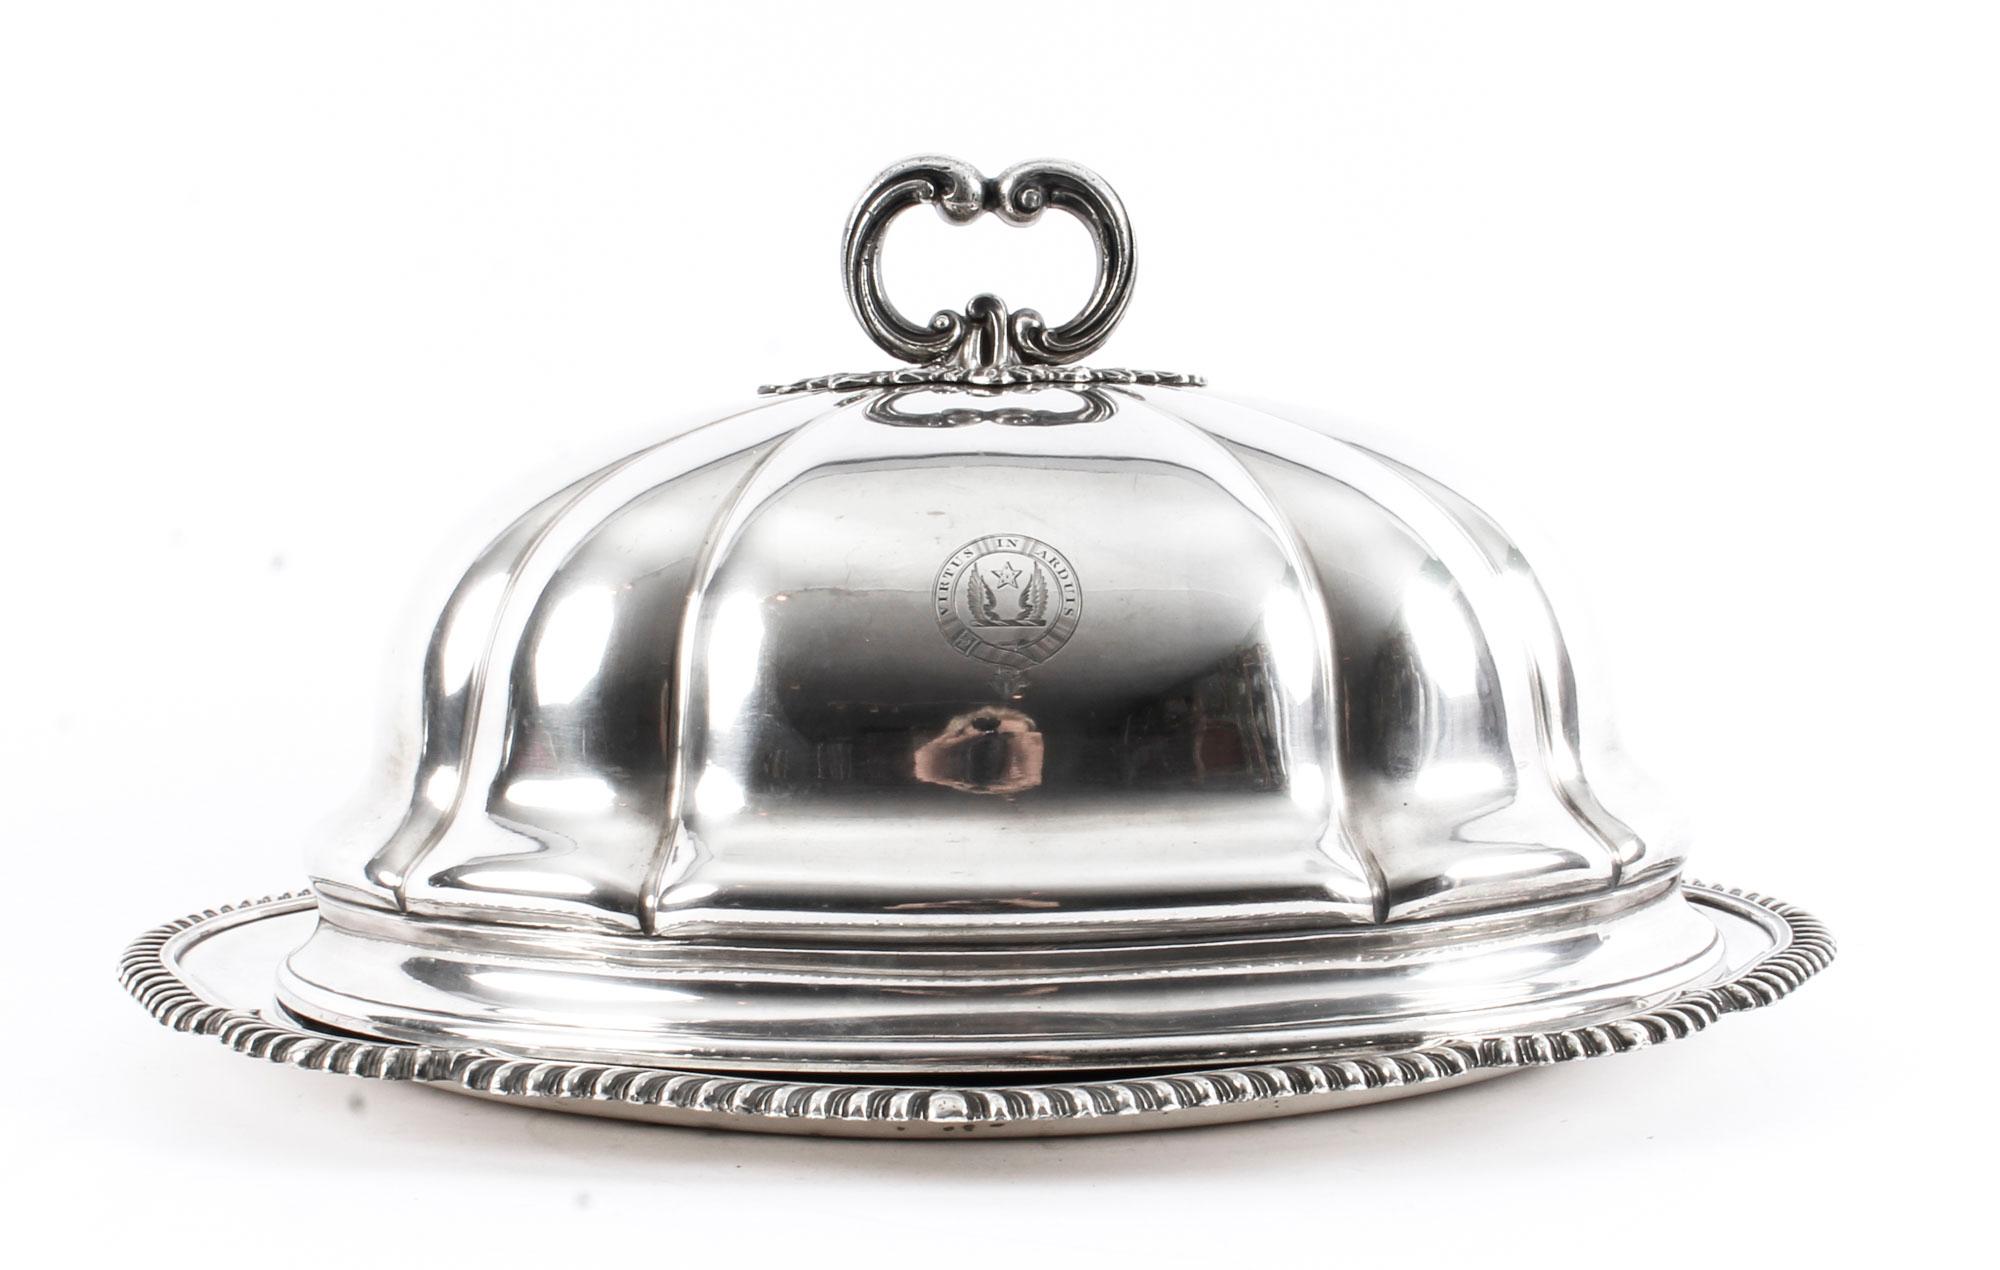 This is a splendid large antique English Victorian Old Sheffield silver plated meat tureen with domed cover, circa 1820 in date and bearing the makers' marks of T & J. Creswick, Sheffield.
 
This beautiful tureen is oval and features an exquisite